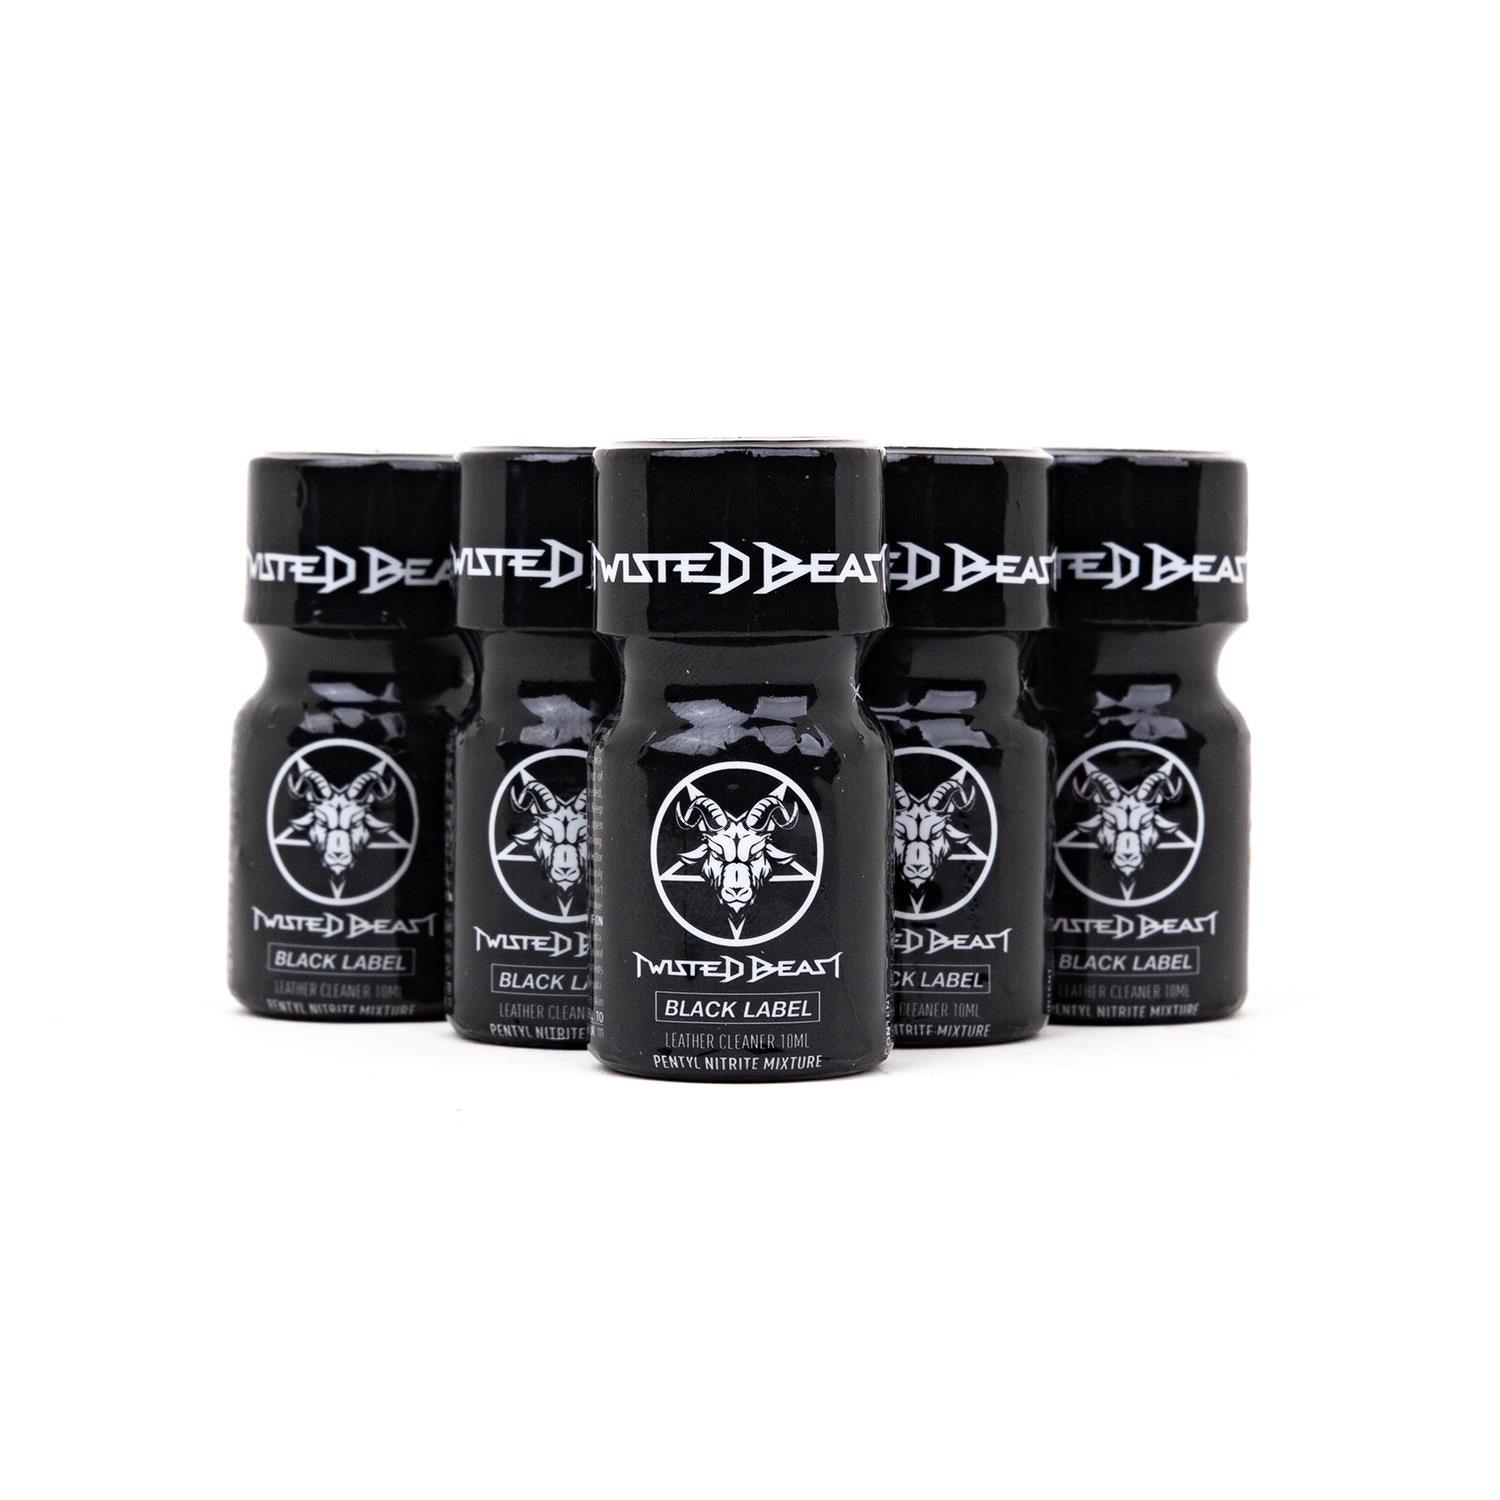 Twisted Beast Black Label, 10ml, 5-Pack by Twisted Beast